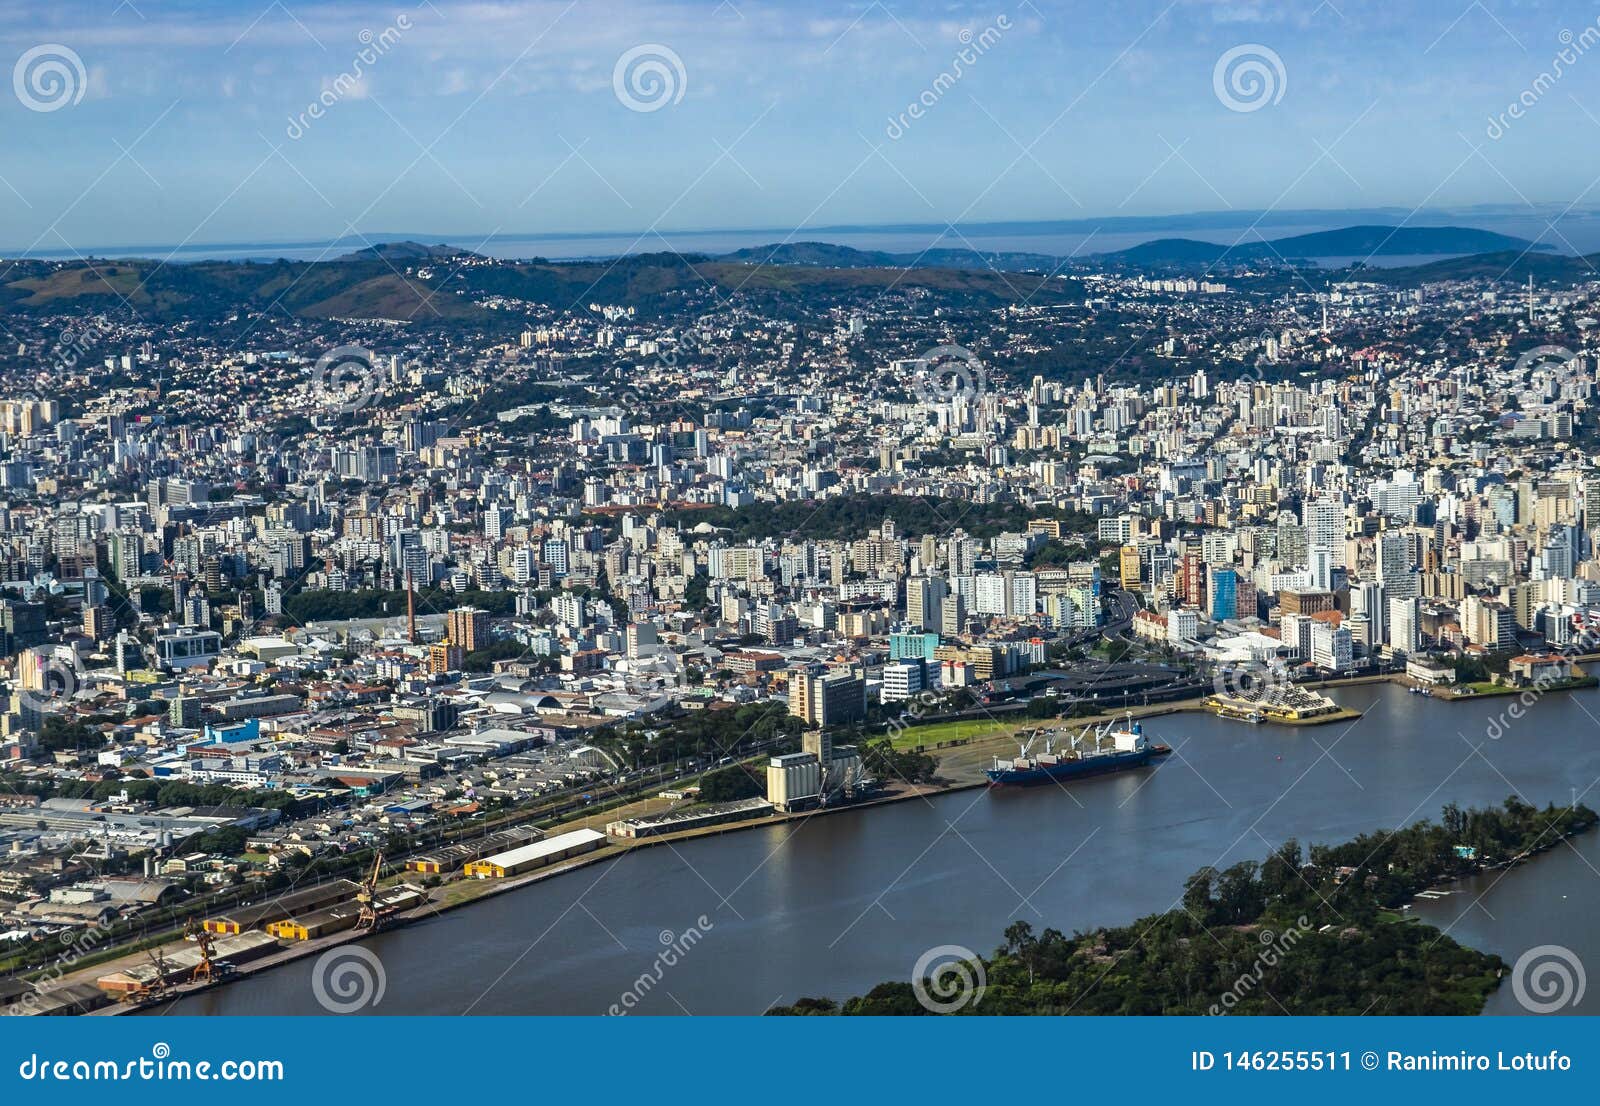 large cities seen from above. city of porto alegre of the state of rio grande do sul, brazil.